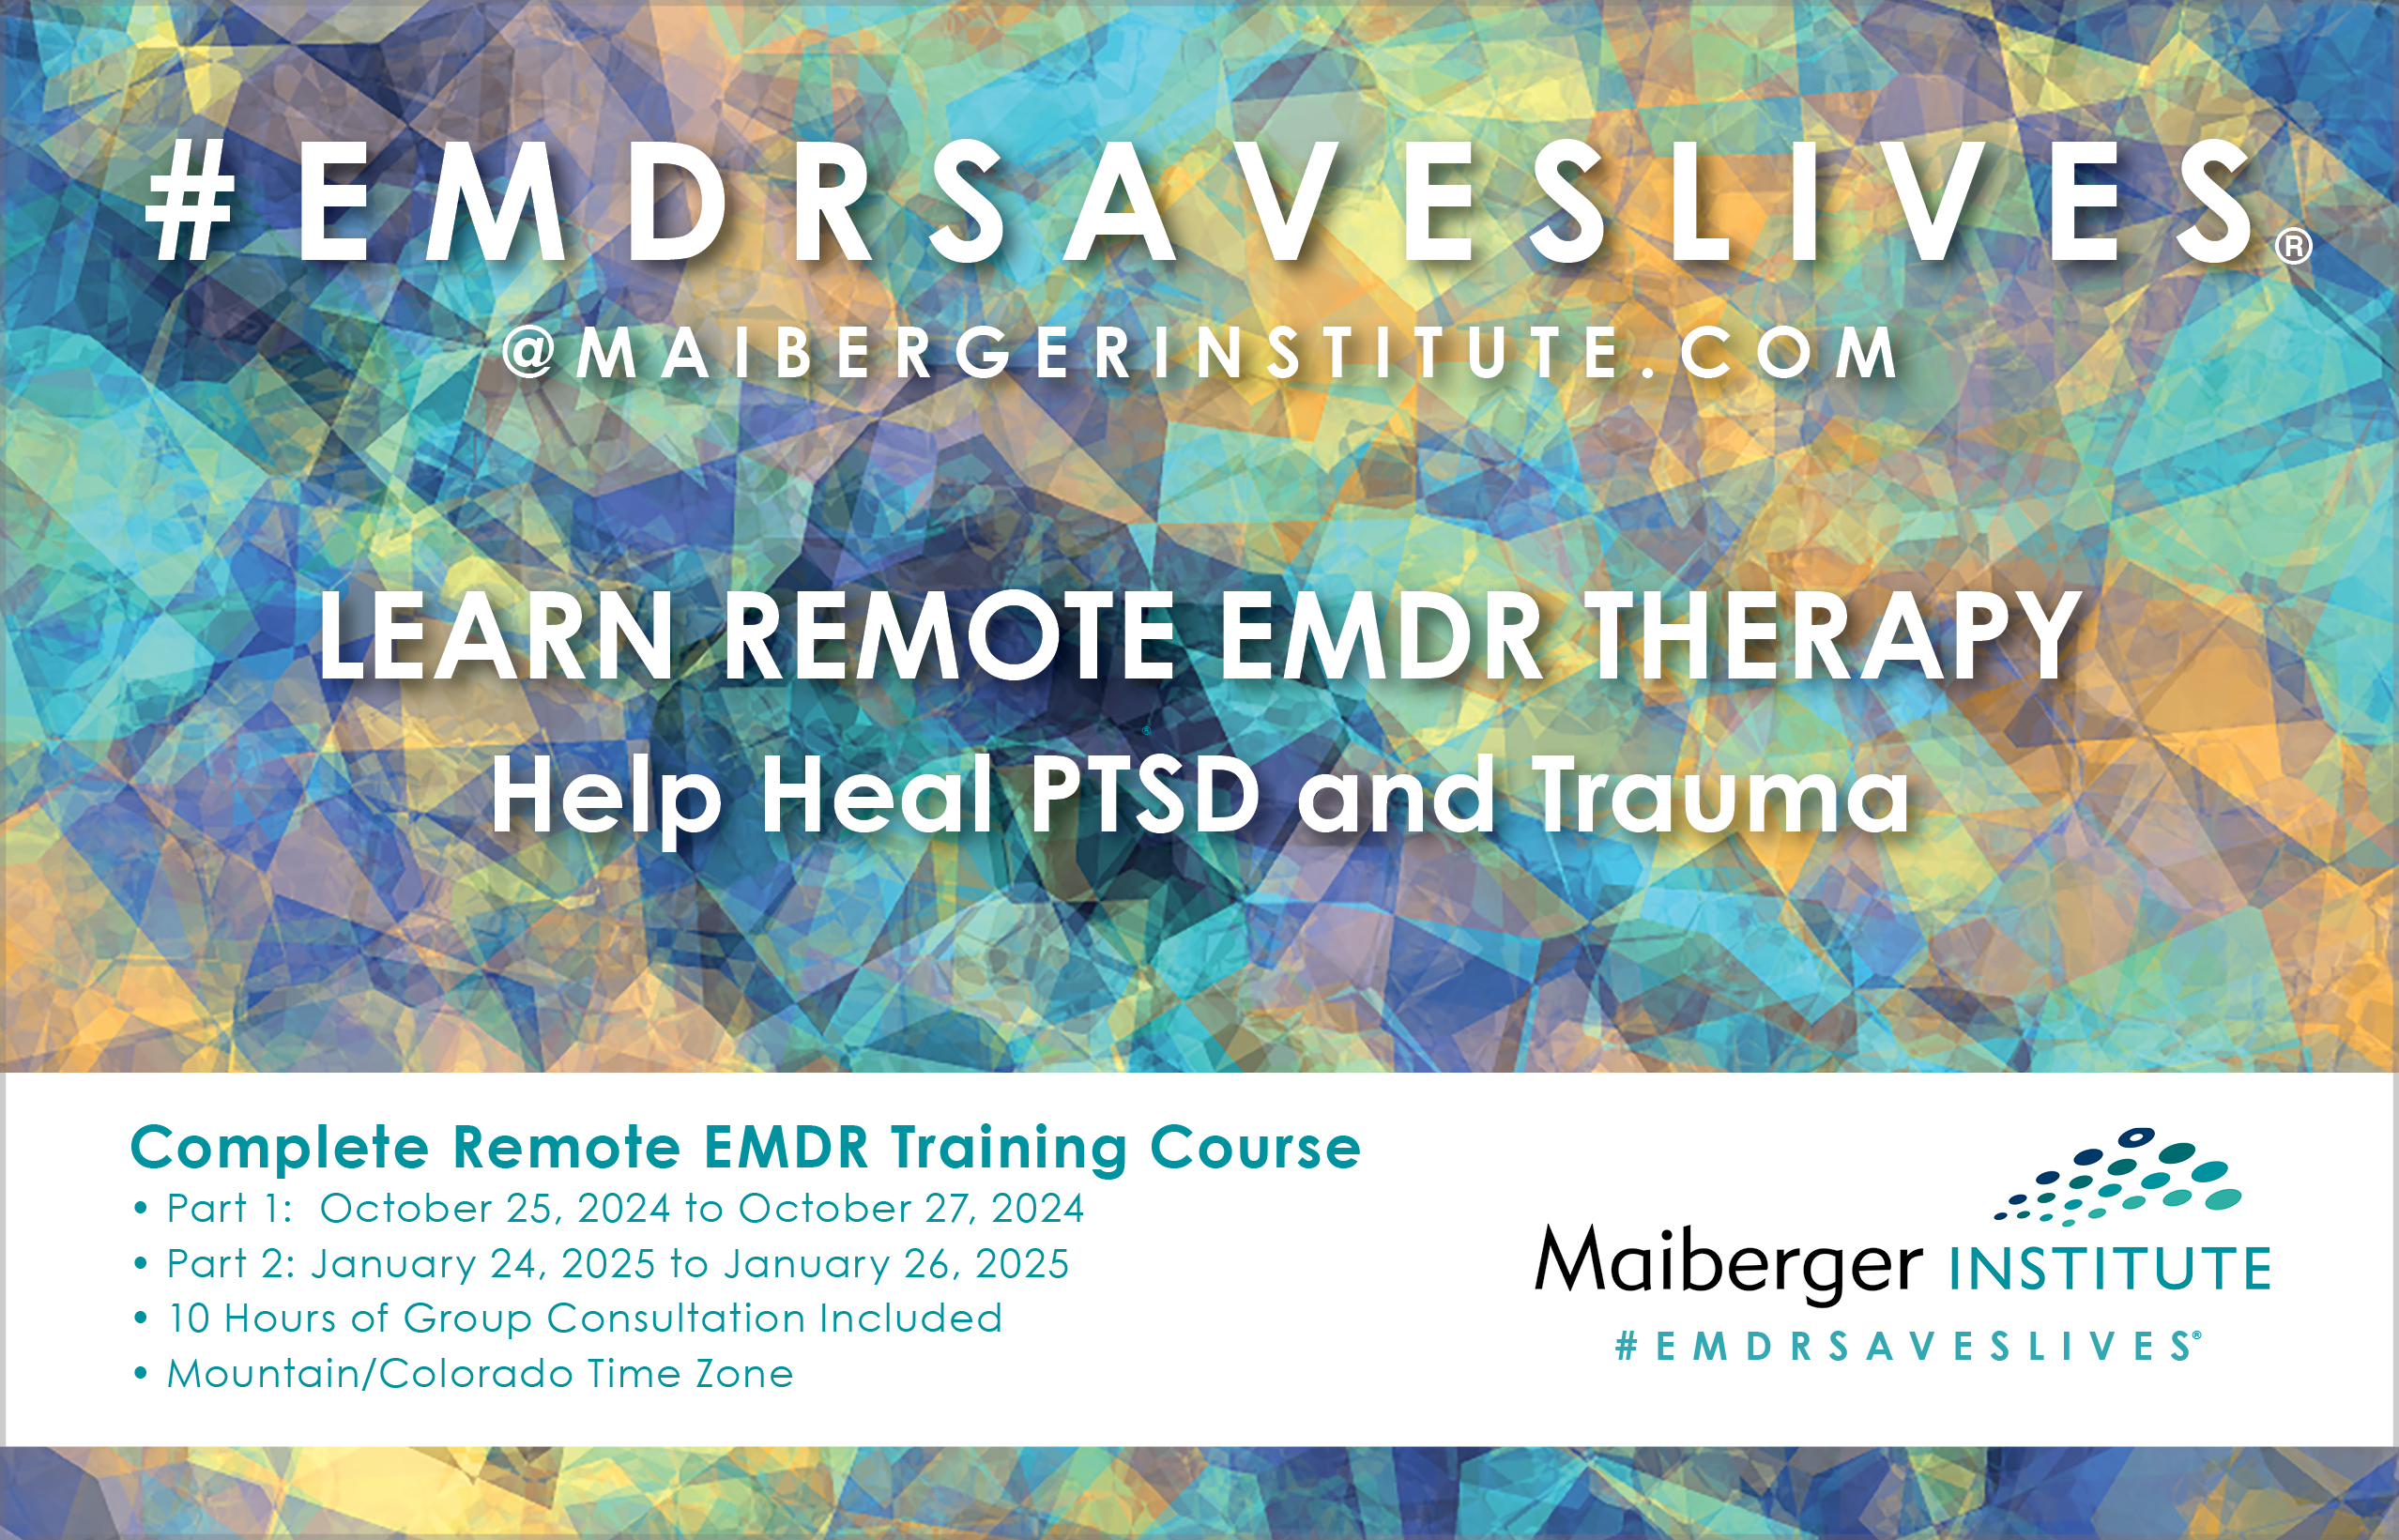 Complete Remote EMDR Training Course - October 2024 and January 2025 - EMDR Training Schedule - Maiberger Institute